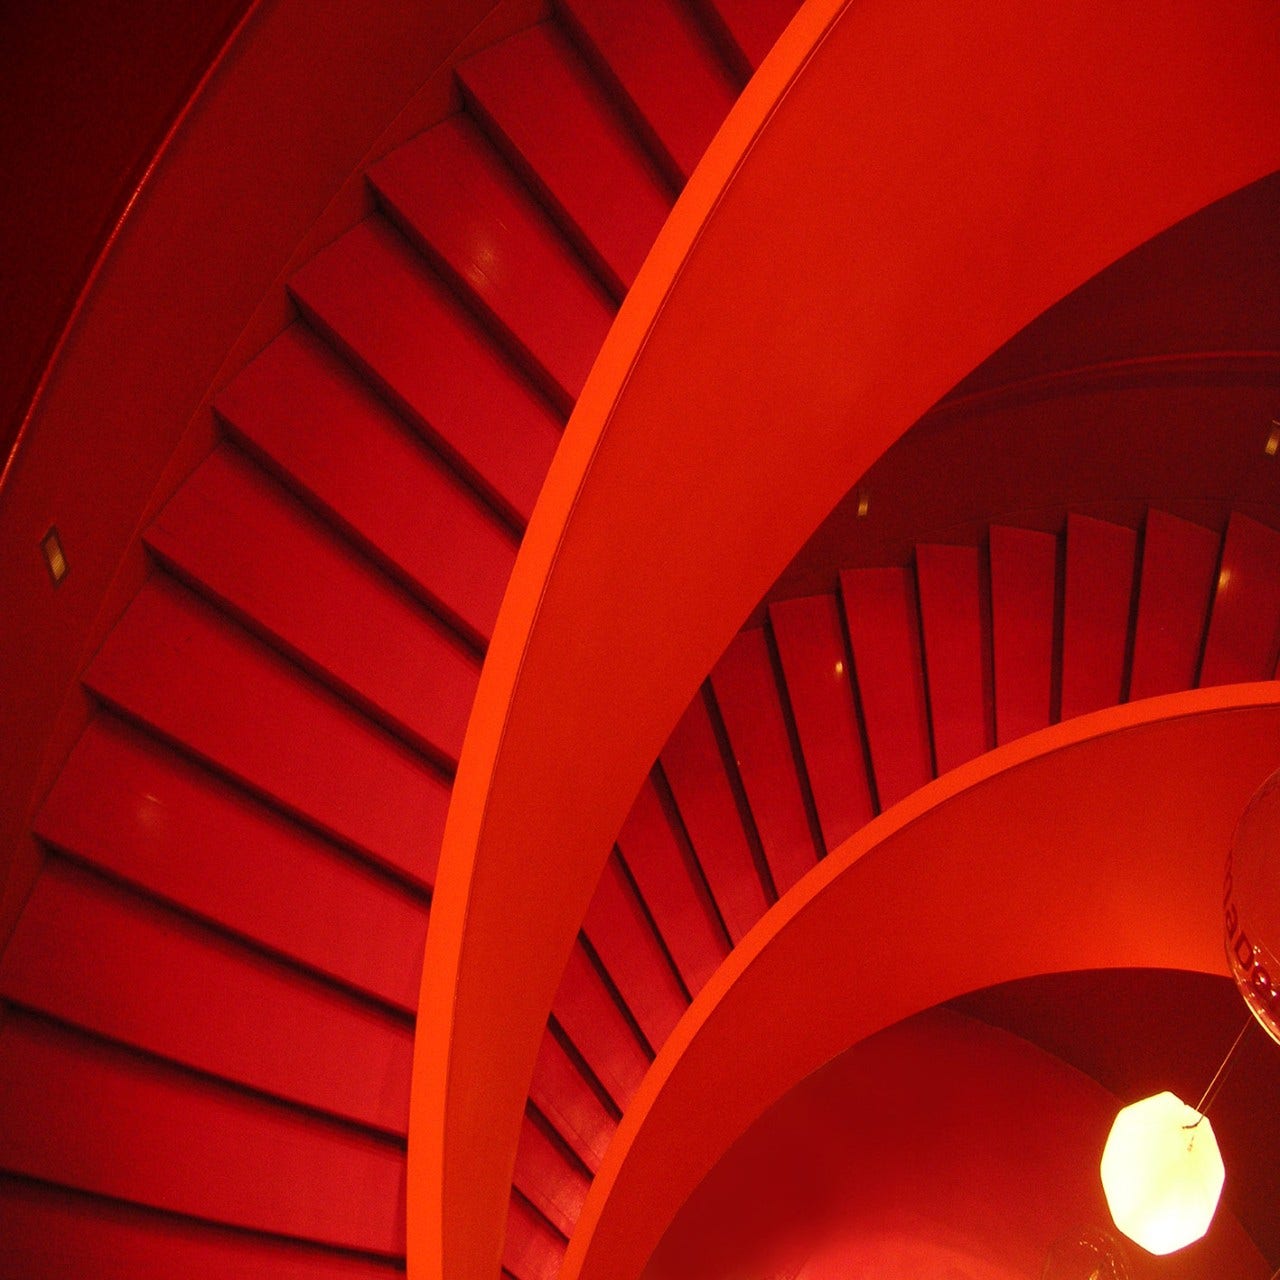 red spiral staircase abstract